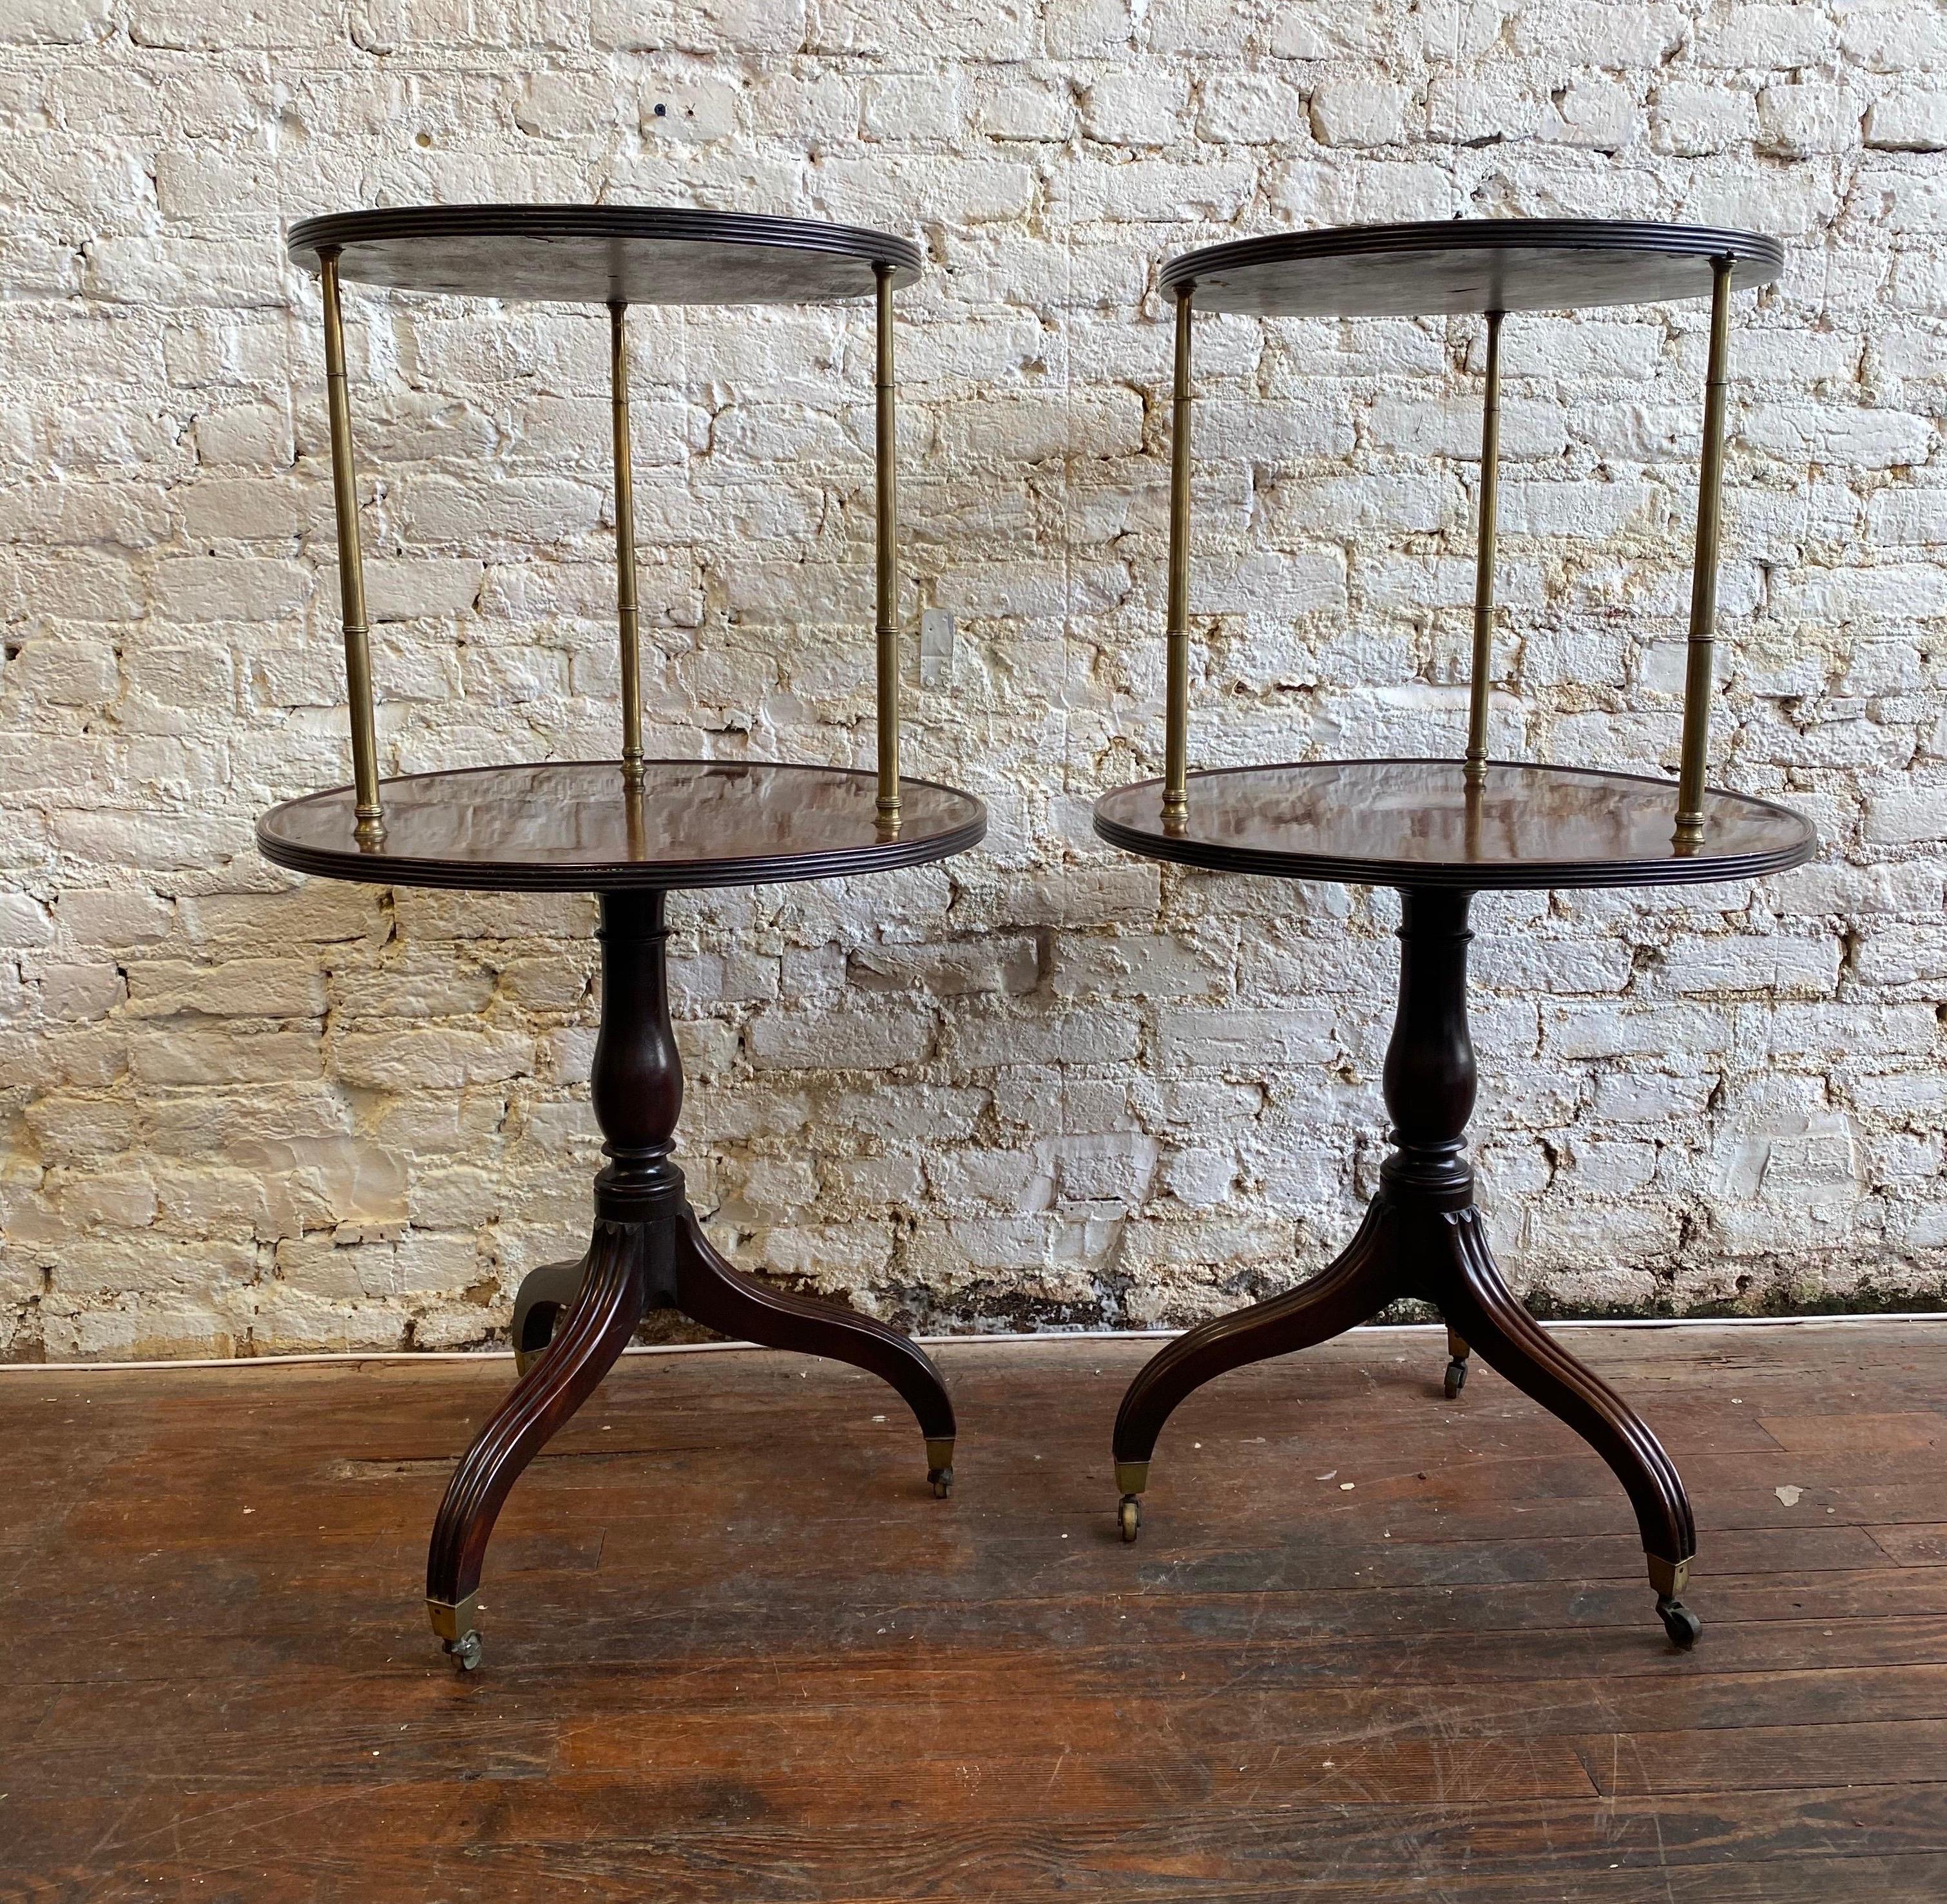 Rare pair of Georgian mahogany dumbwaiters on turned bases, reeded legs and original castors with brass columns separating the two solid mahogany tops. Incredible quality.